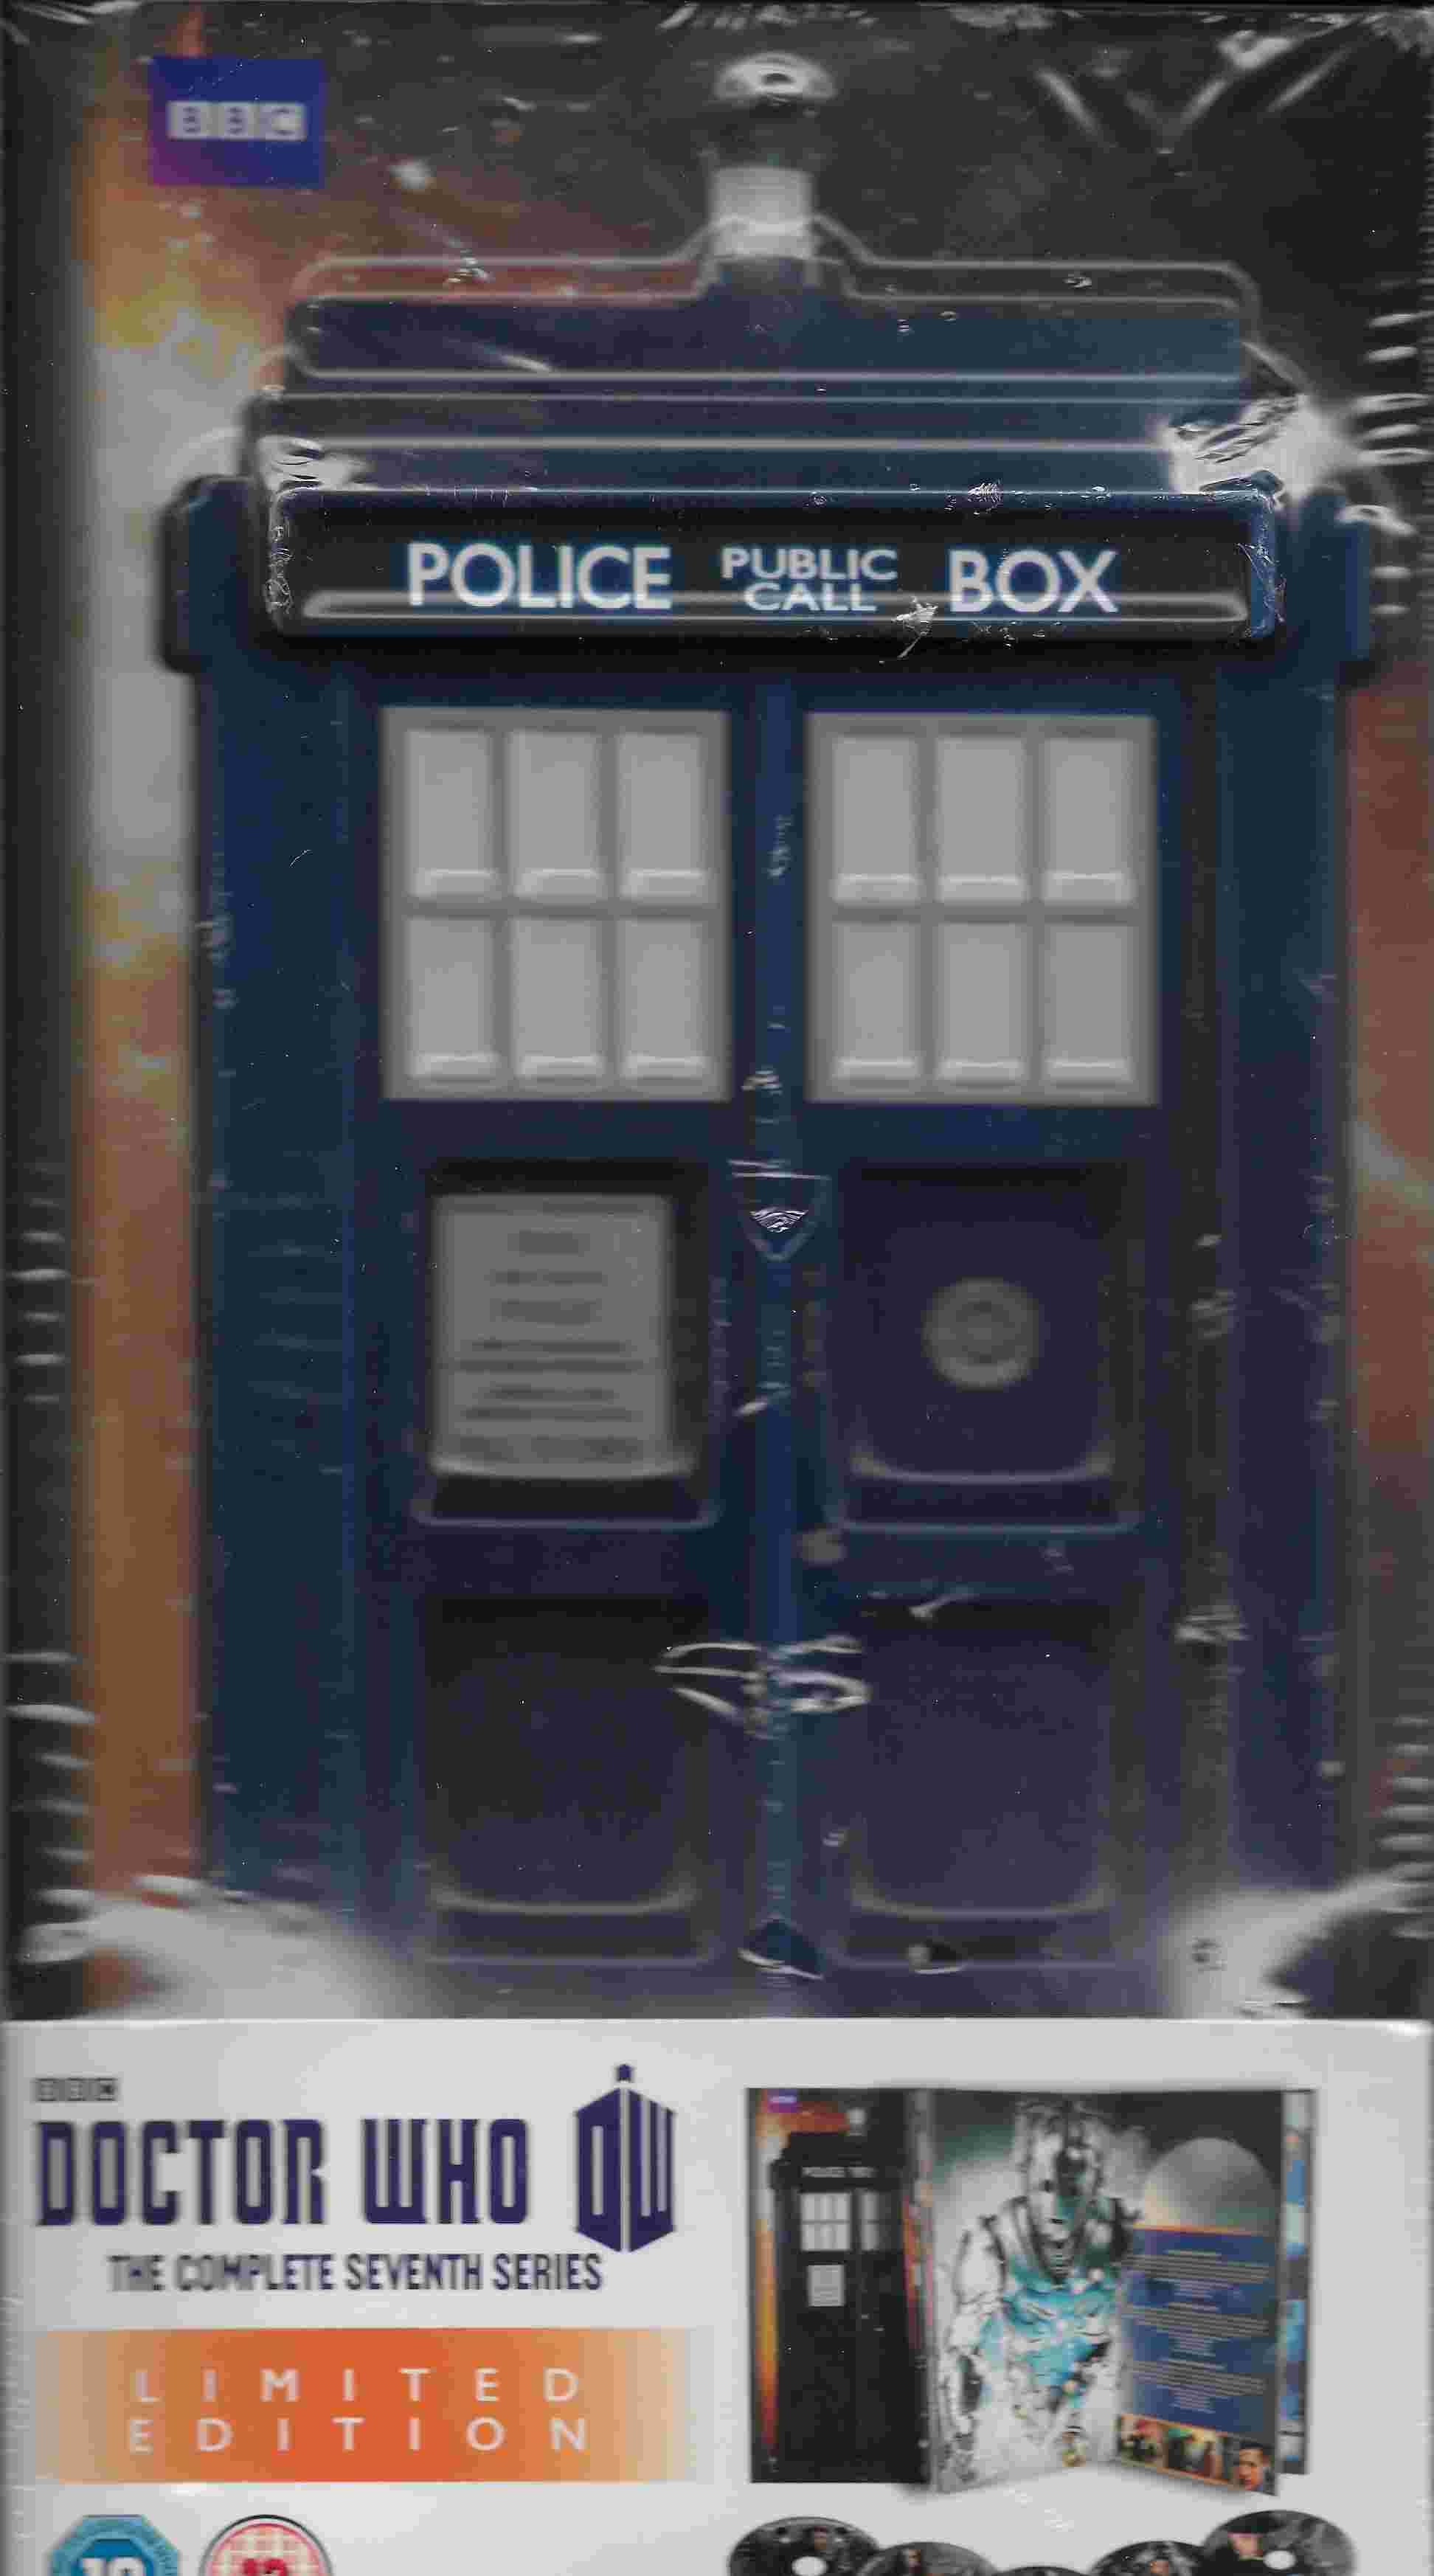 Picture of BBCBD 0251 Doctor Who - Series 7 boxed set by artist Various from the BBC blu-rays - Records and Tapes library